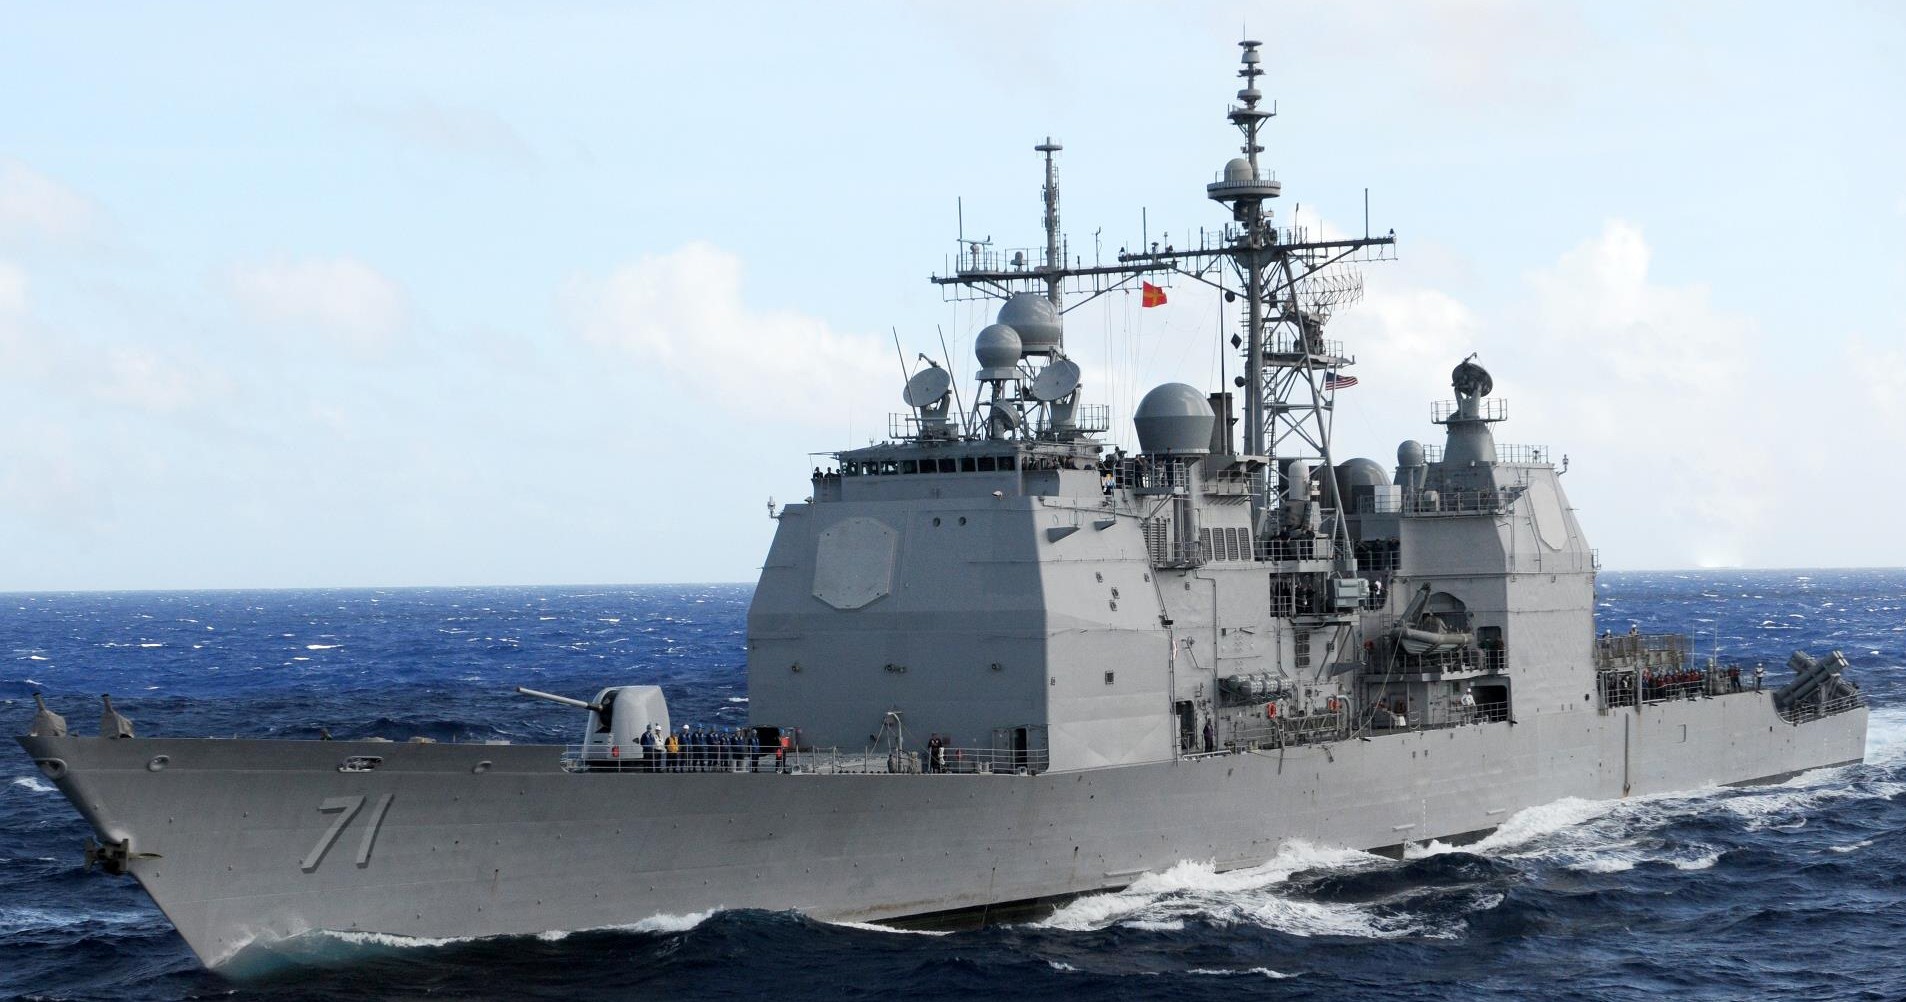 cg-71 uss cape st. george ticonderoga class guided missile cruiser us navy 81